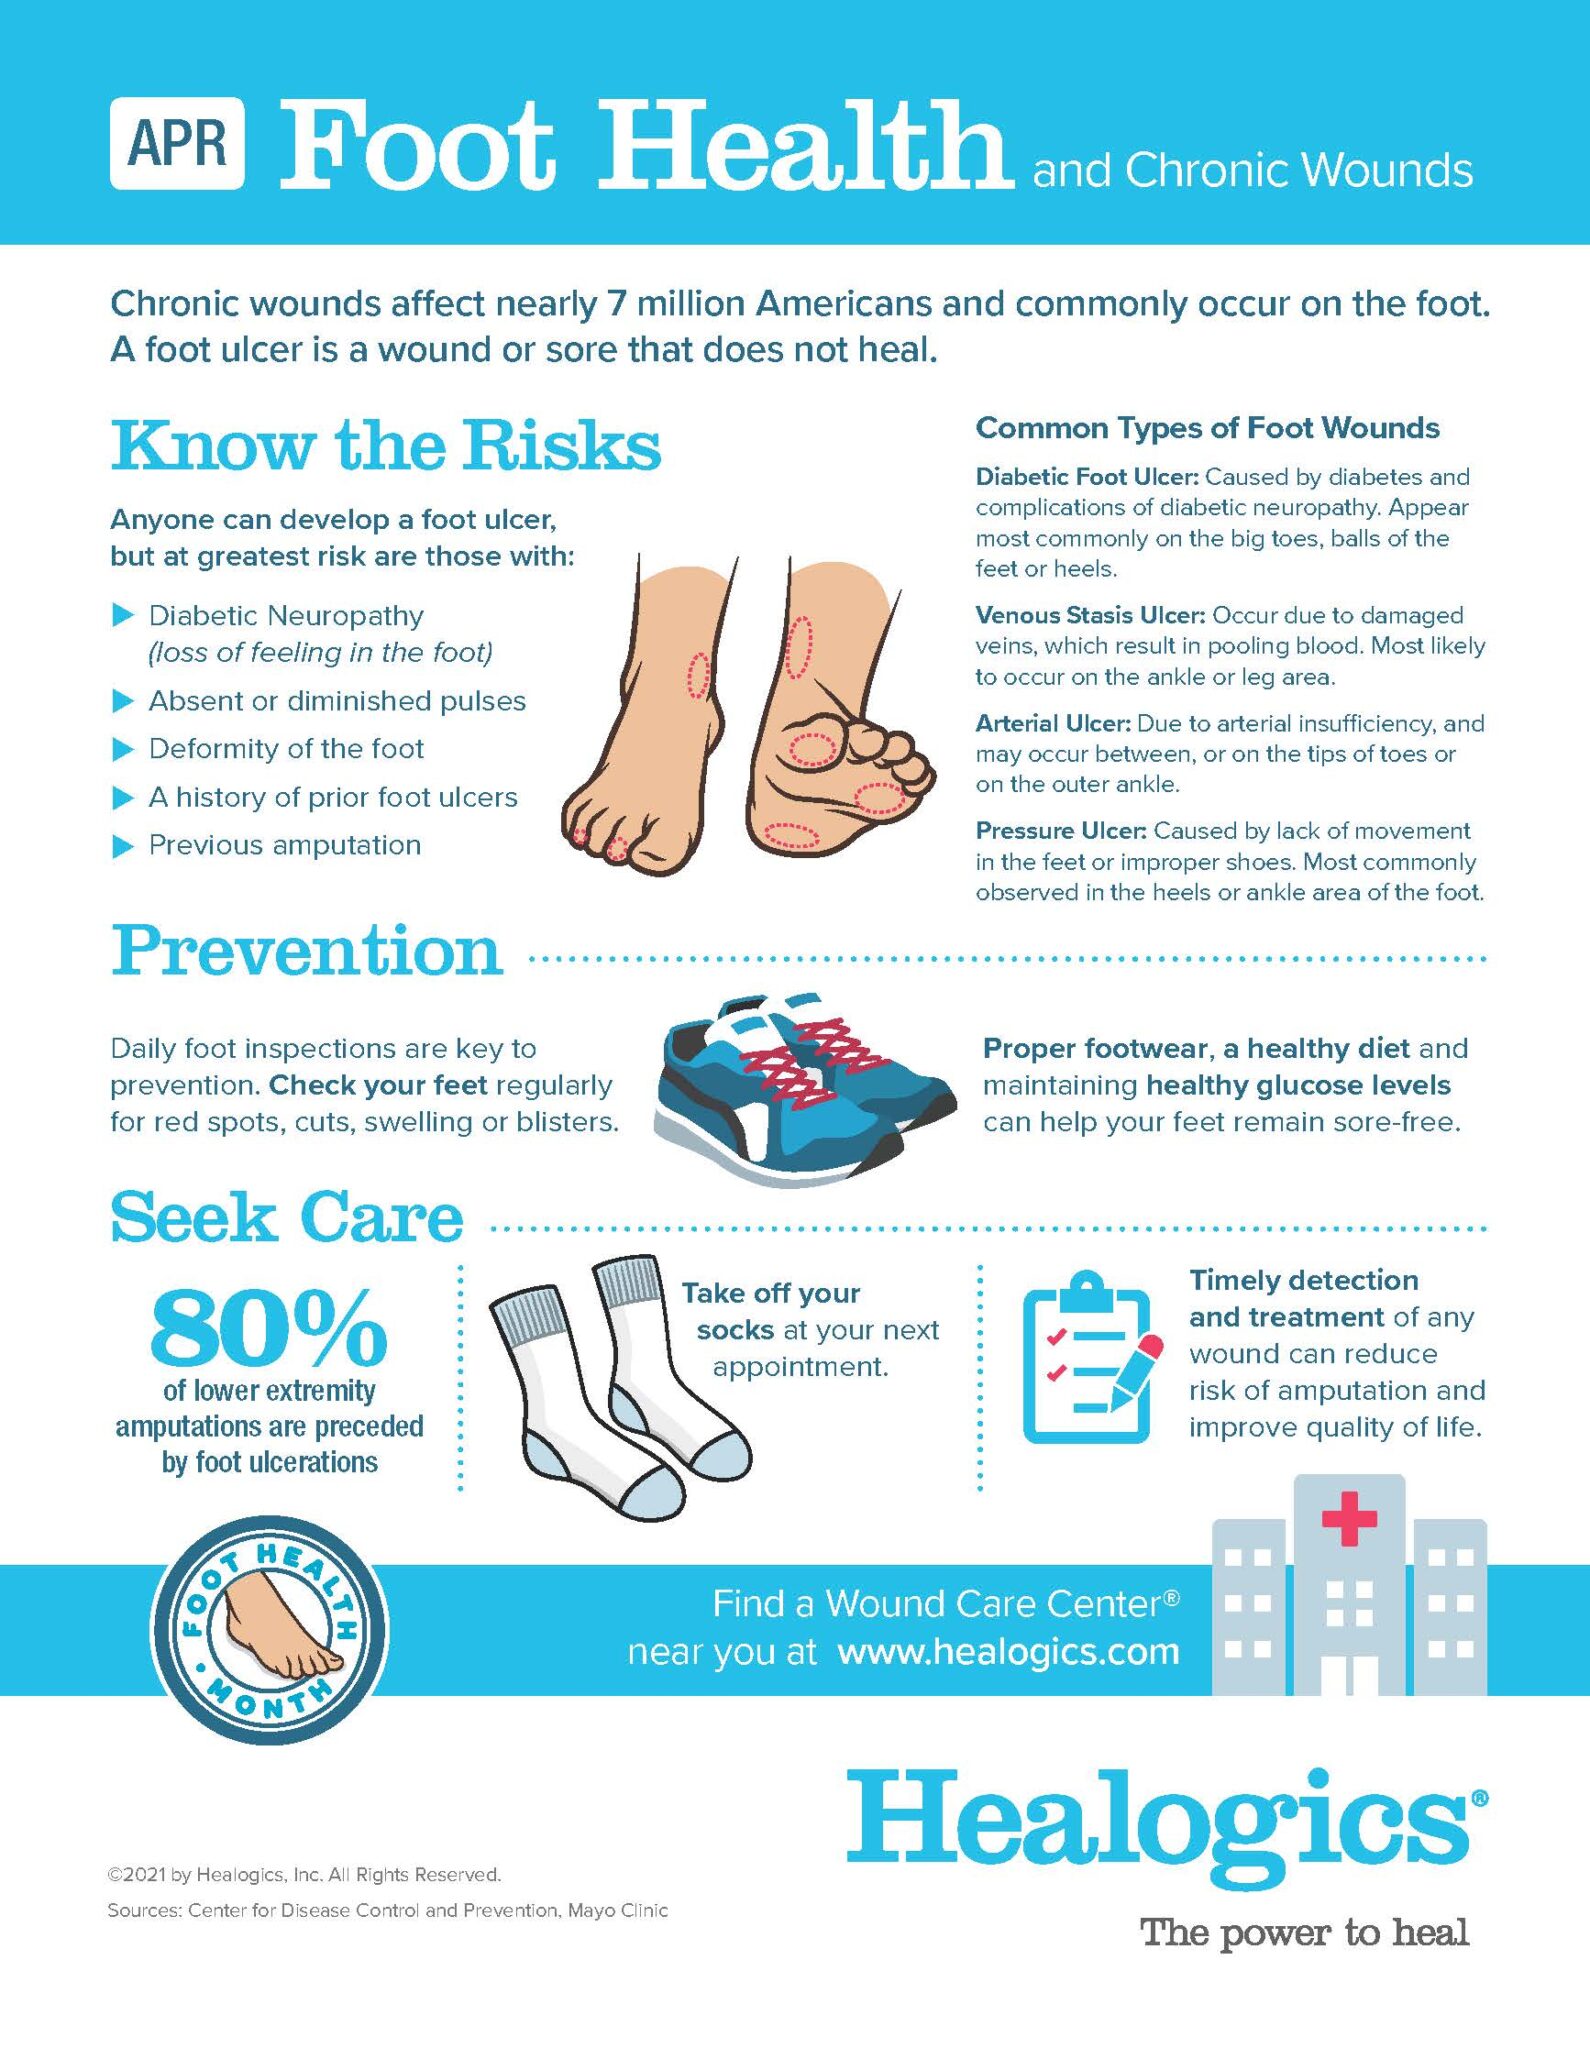 Healogics® 2021 The Year of Healing Program Focuses on Foot Health to ...